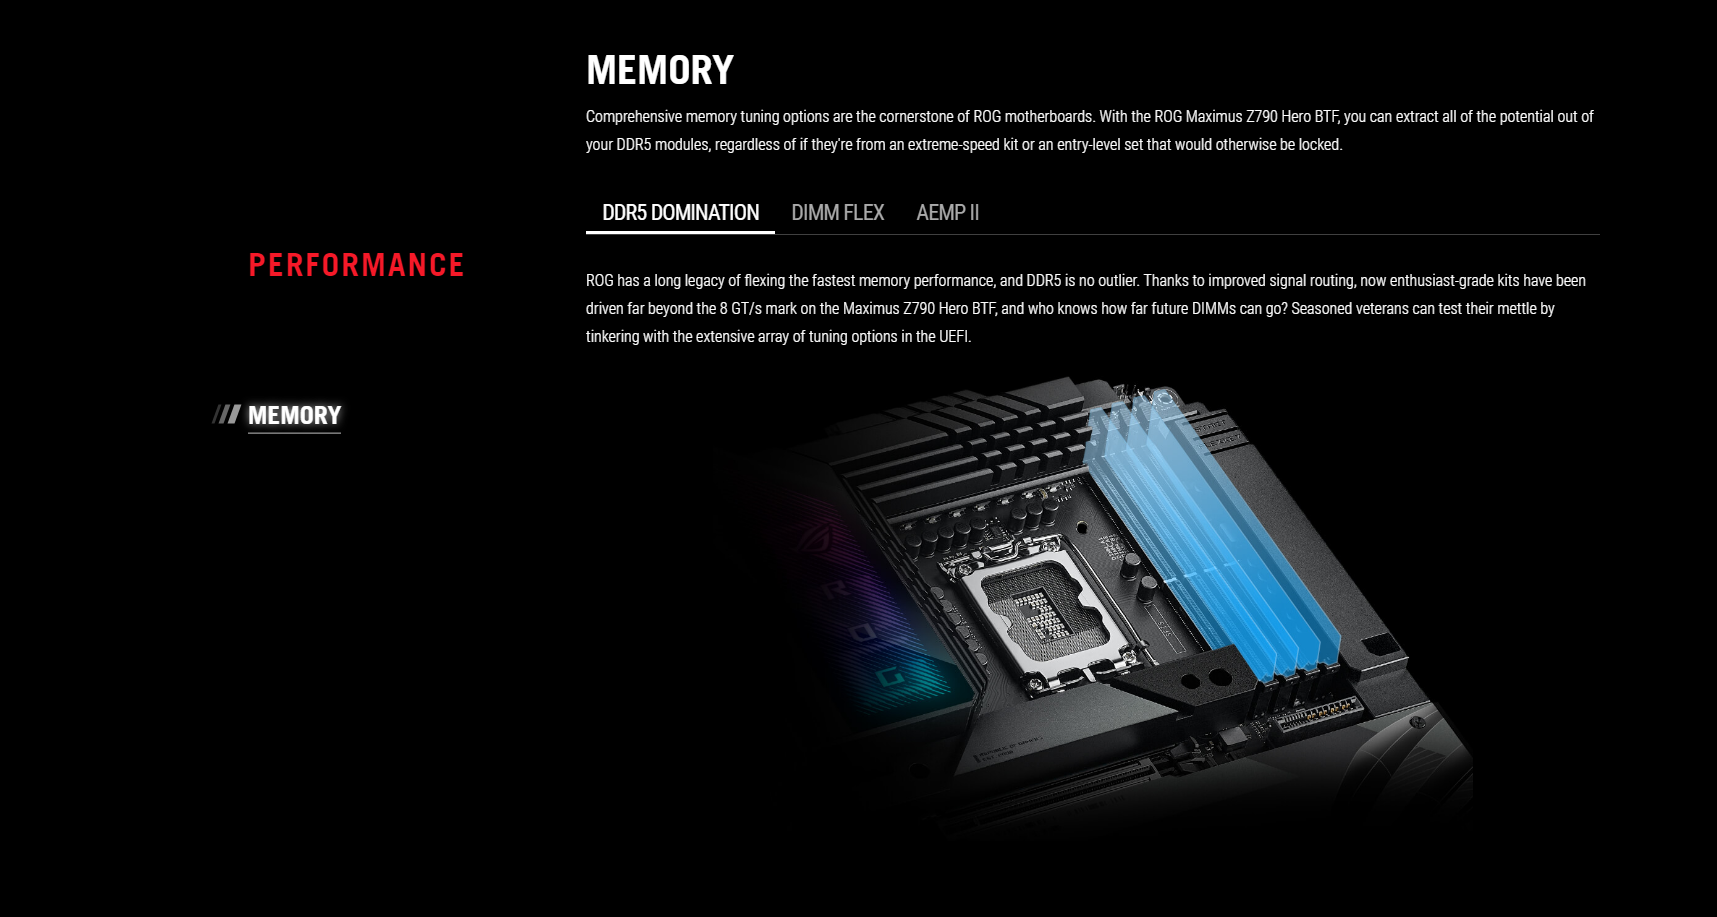 A large marketing image providing additional information about the product ASUS ROG Z790 Hero BTF LGA1700 ATX Desktop Motherboard - Additional alt info not provided